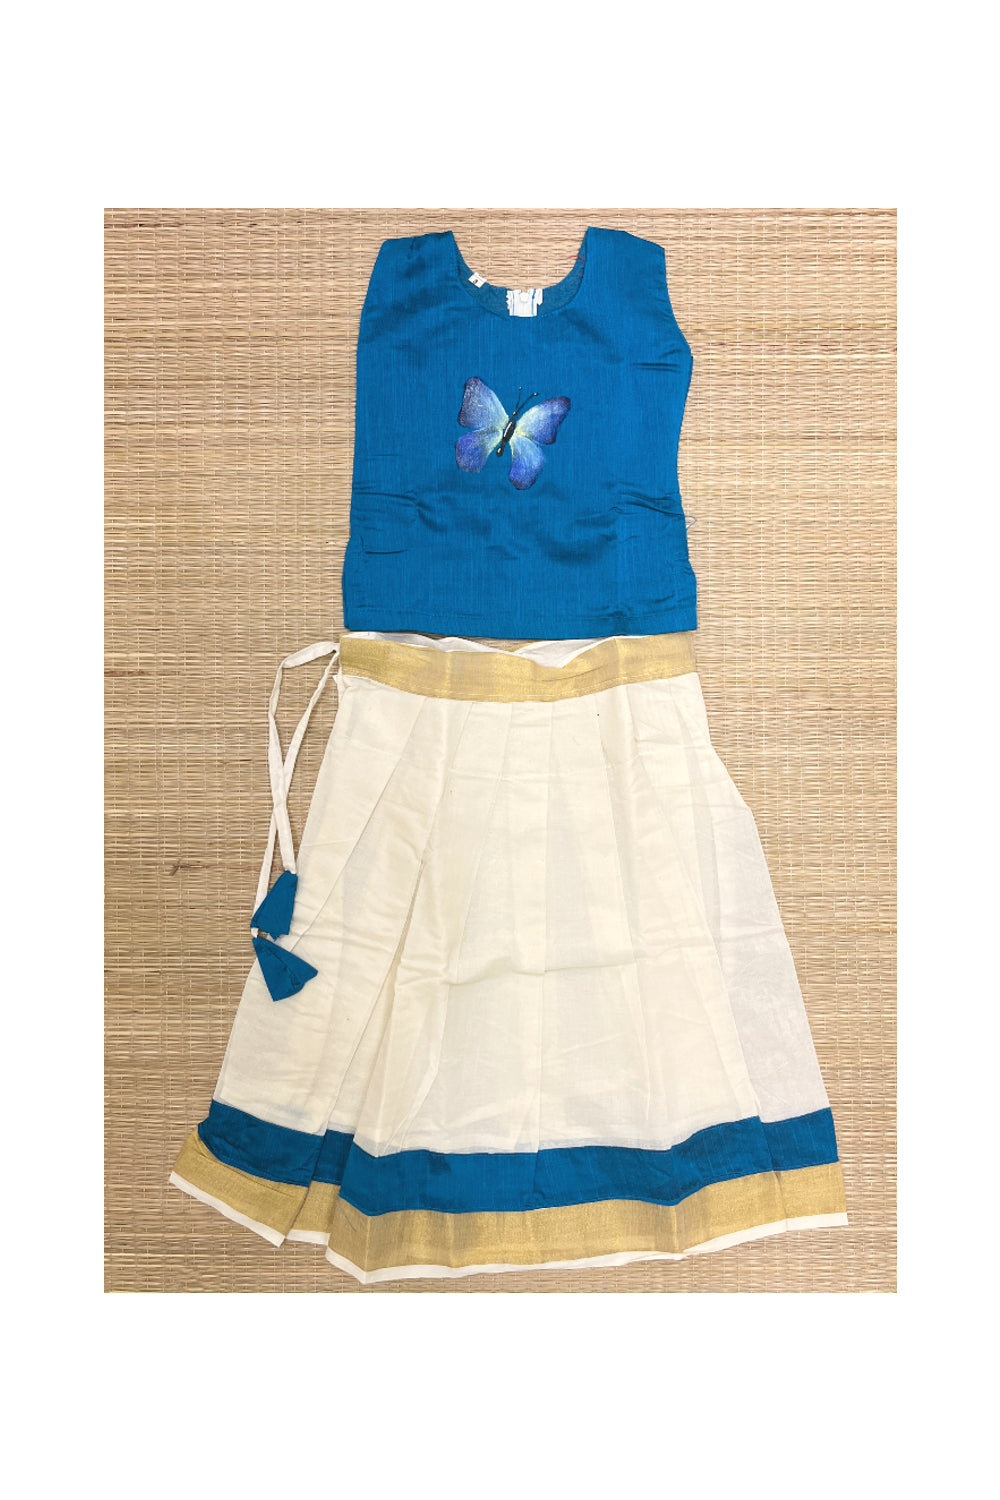 Southloom Kerala Pavada Blue Blouse with Butterfly Mural Designs (Age - 3 Years)